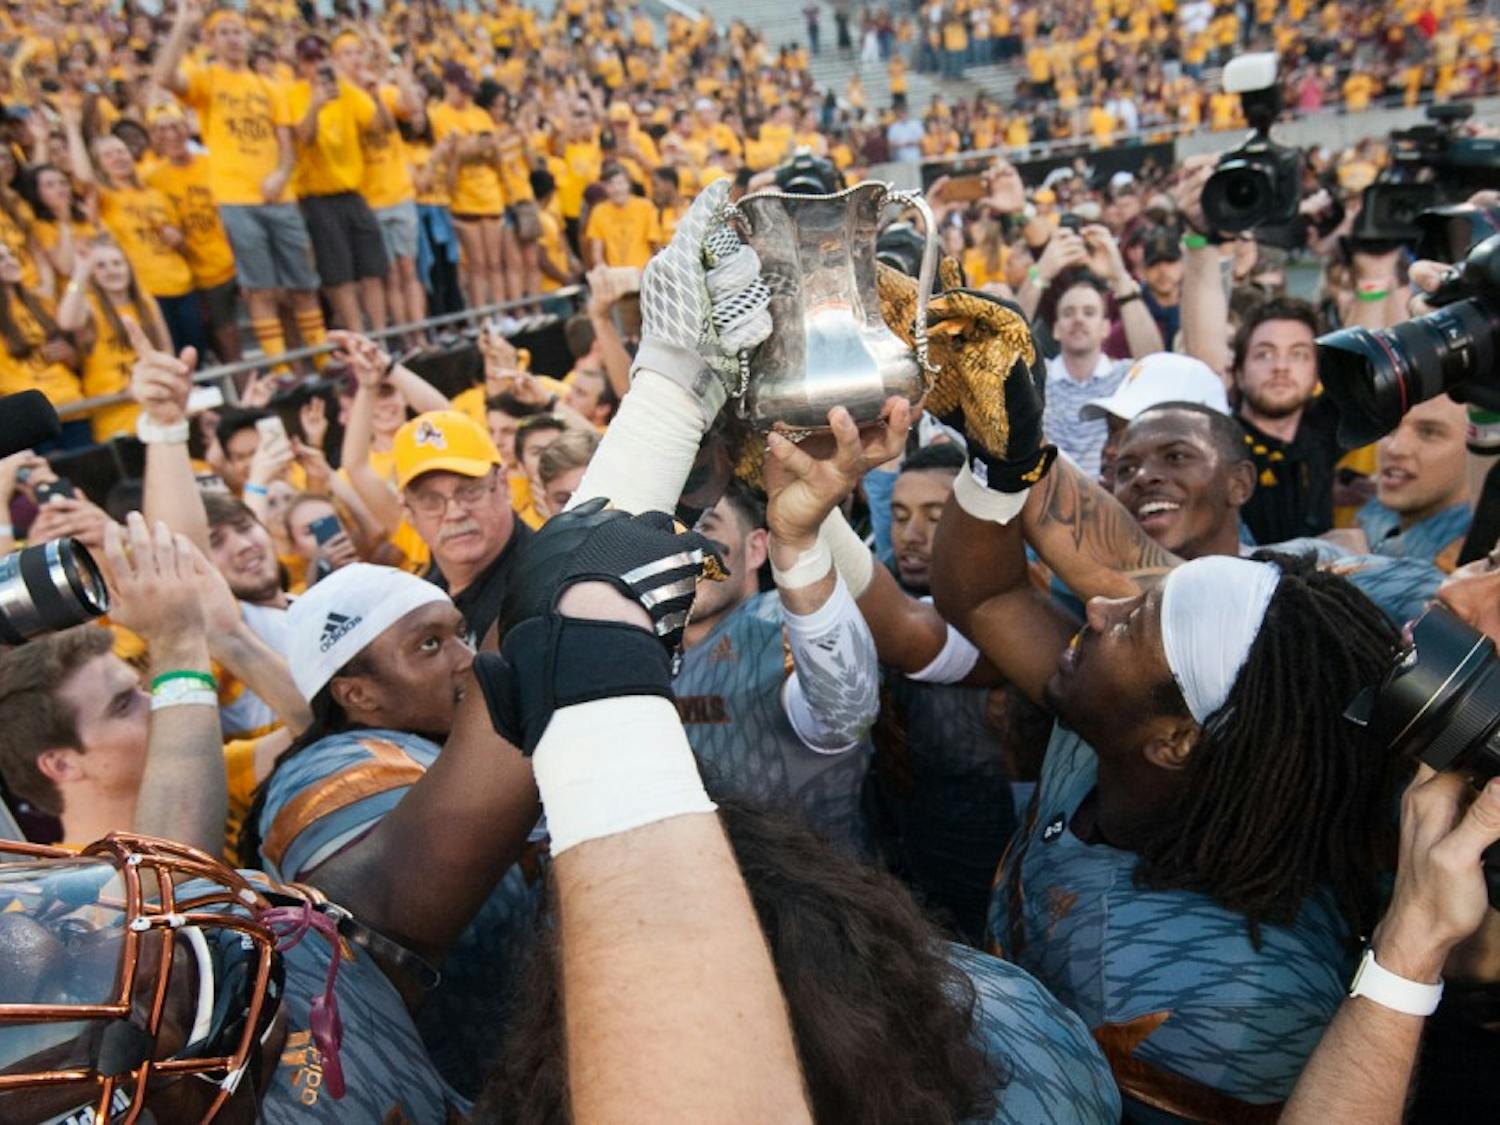 ASU football players lift the Territorial Cup in celebration after defeating UA on Saturday, Nov. 21, 2015, at Sun Devil Stadium in Tempe.